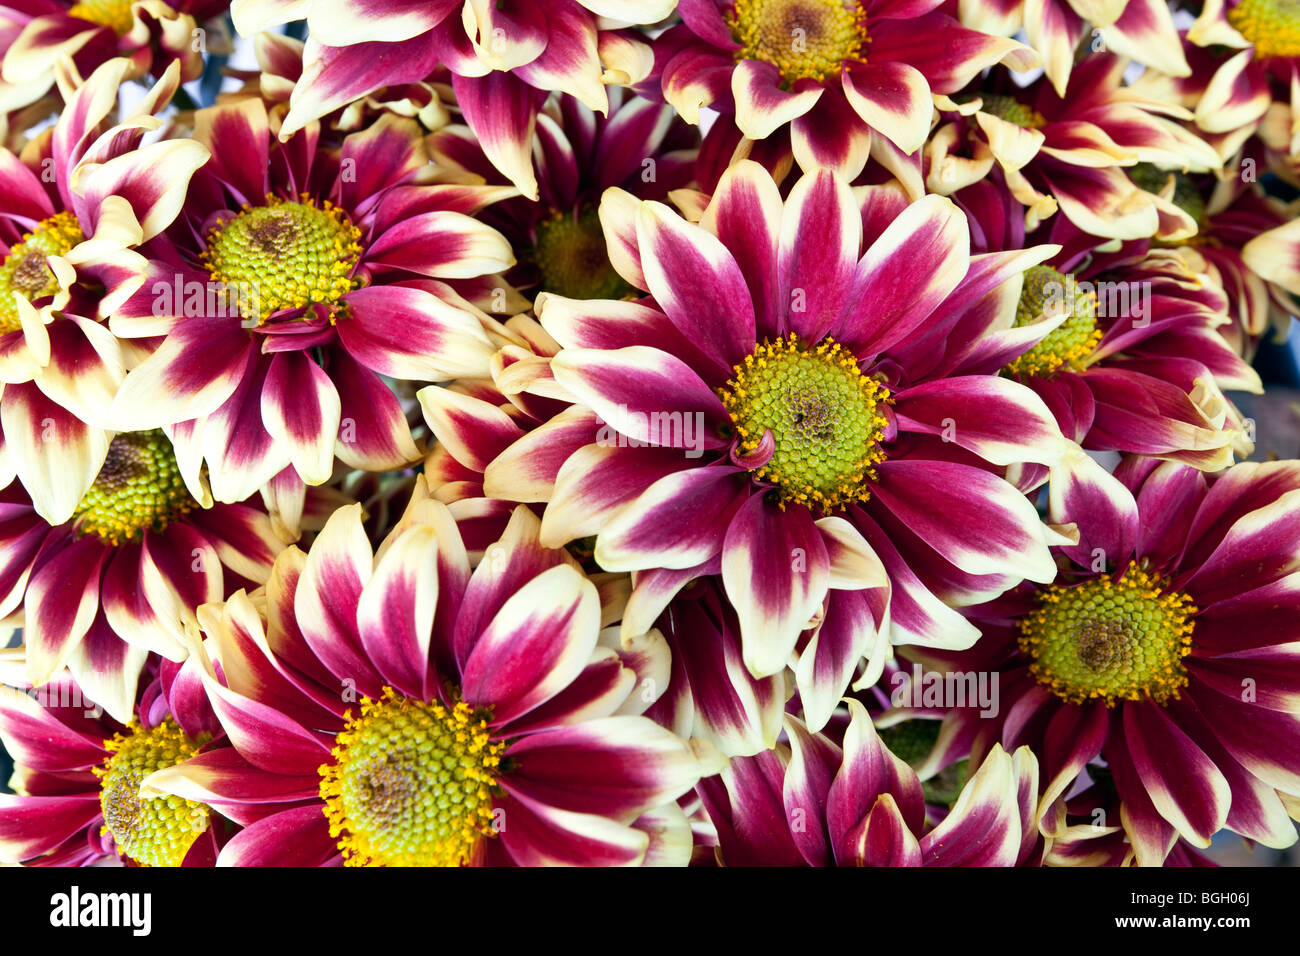 Red and white daisy shot in close up with wide angle lens in studio Stock Photo